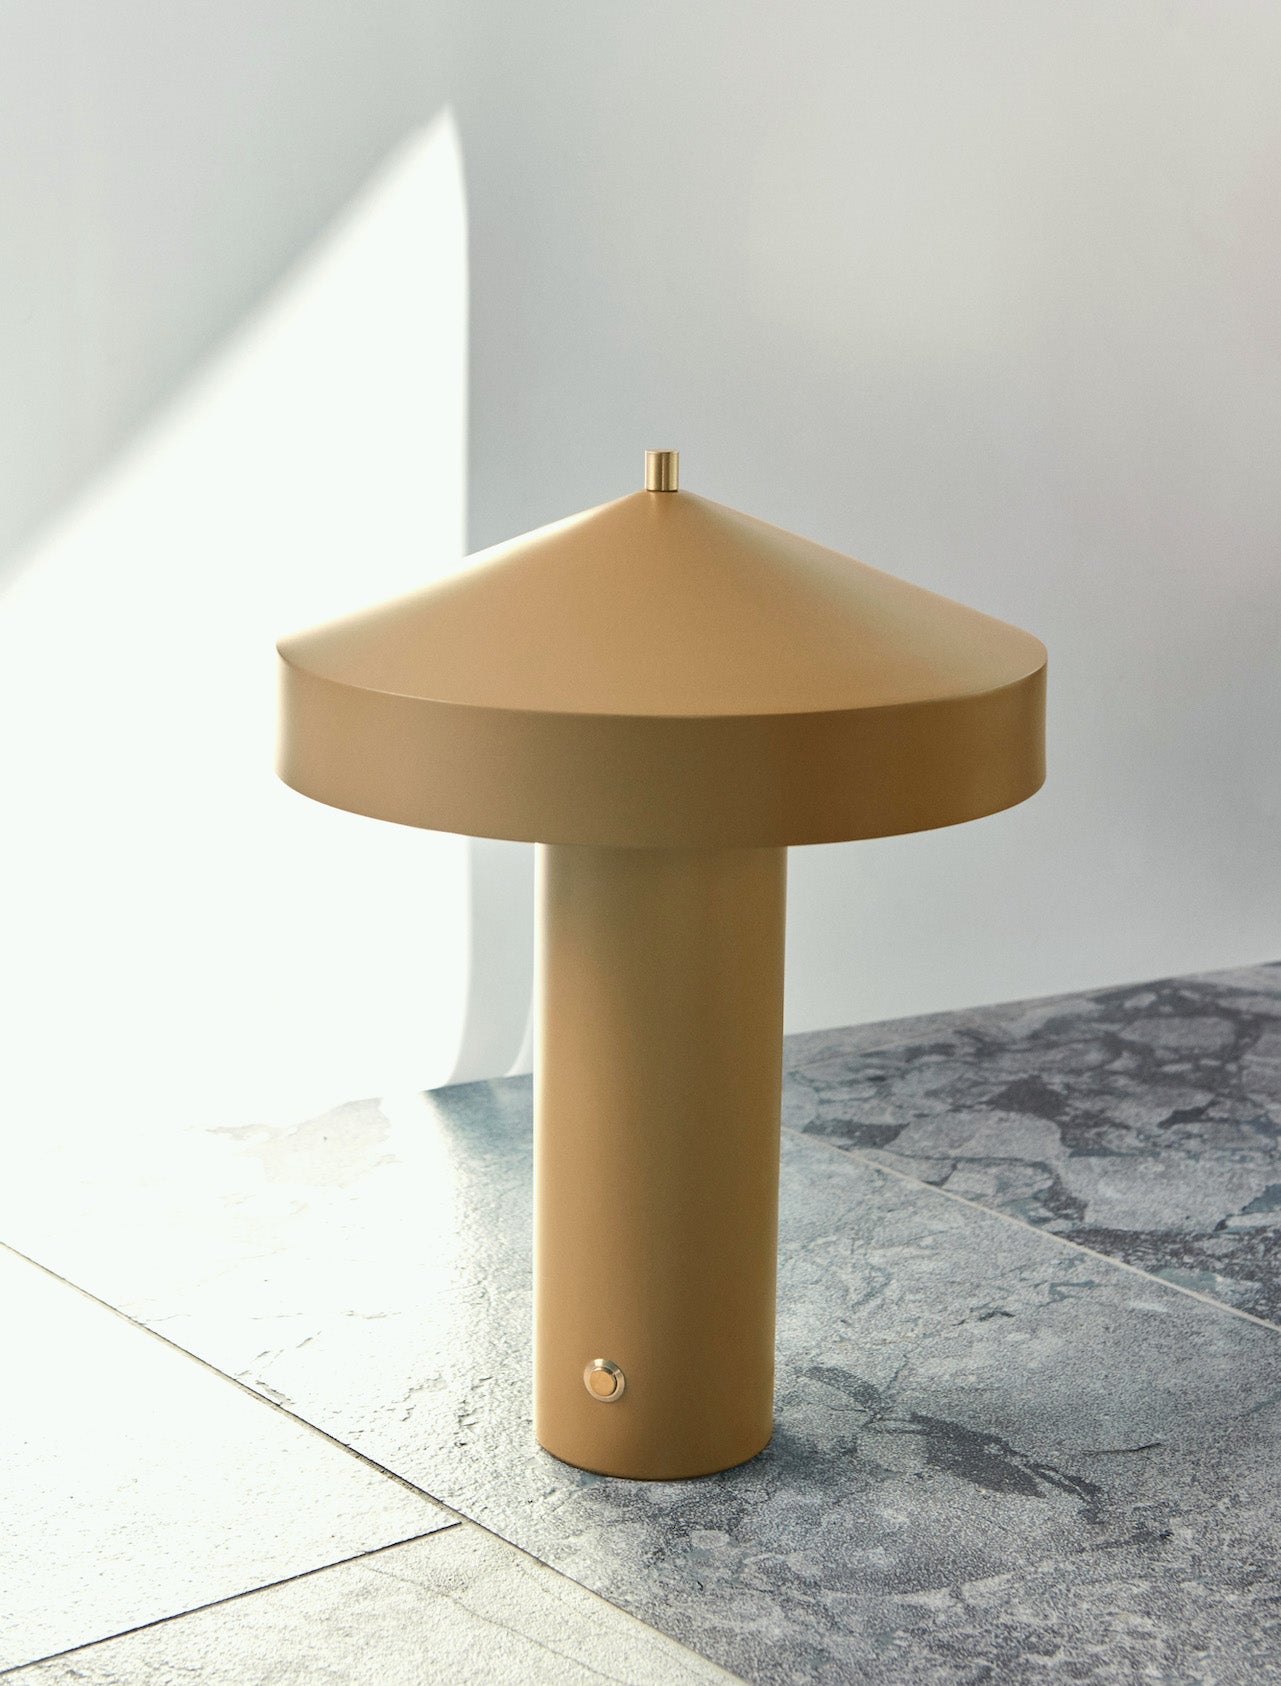 Oyoy Living Hatto Table Lamp (UE)